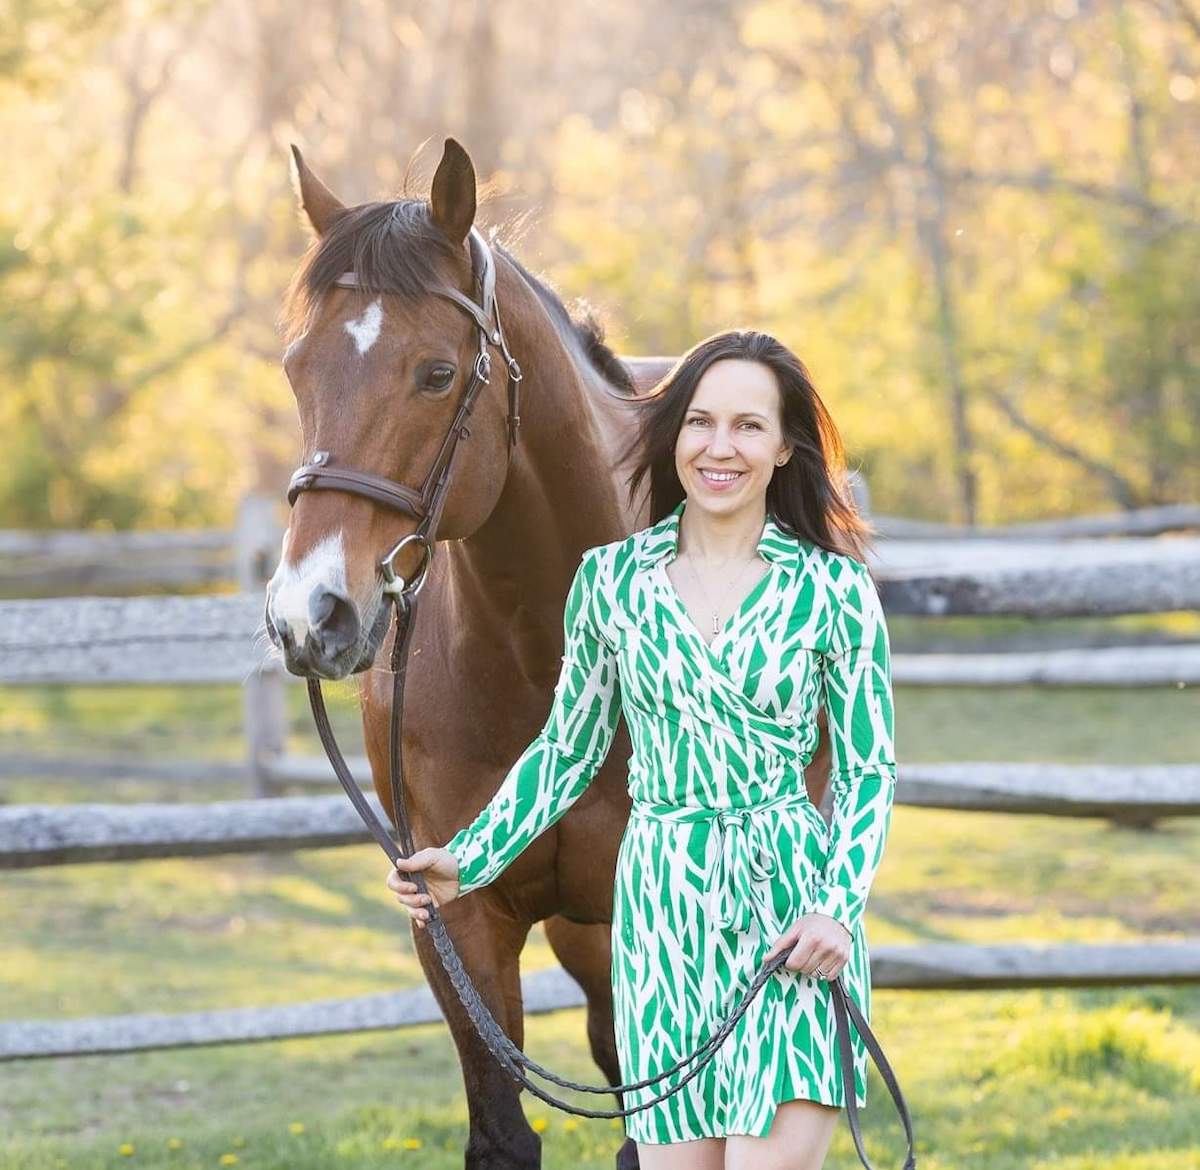 At home with the horses: Jessica Paquette looks after a couple of Thoroughbreds. Photo: Virginia Horse Racing